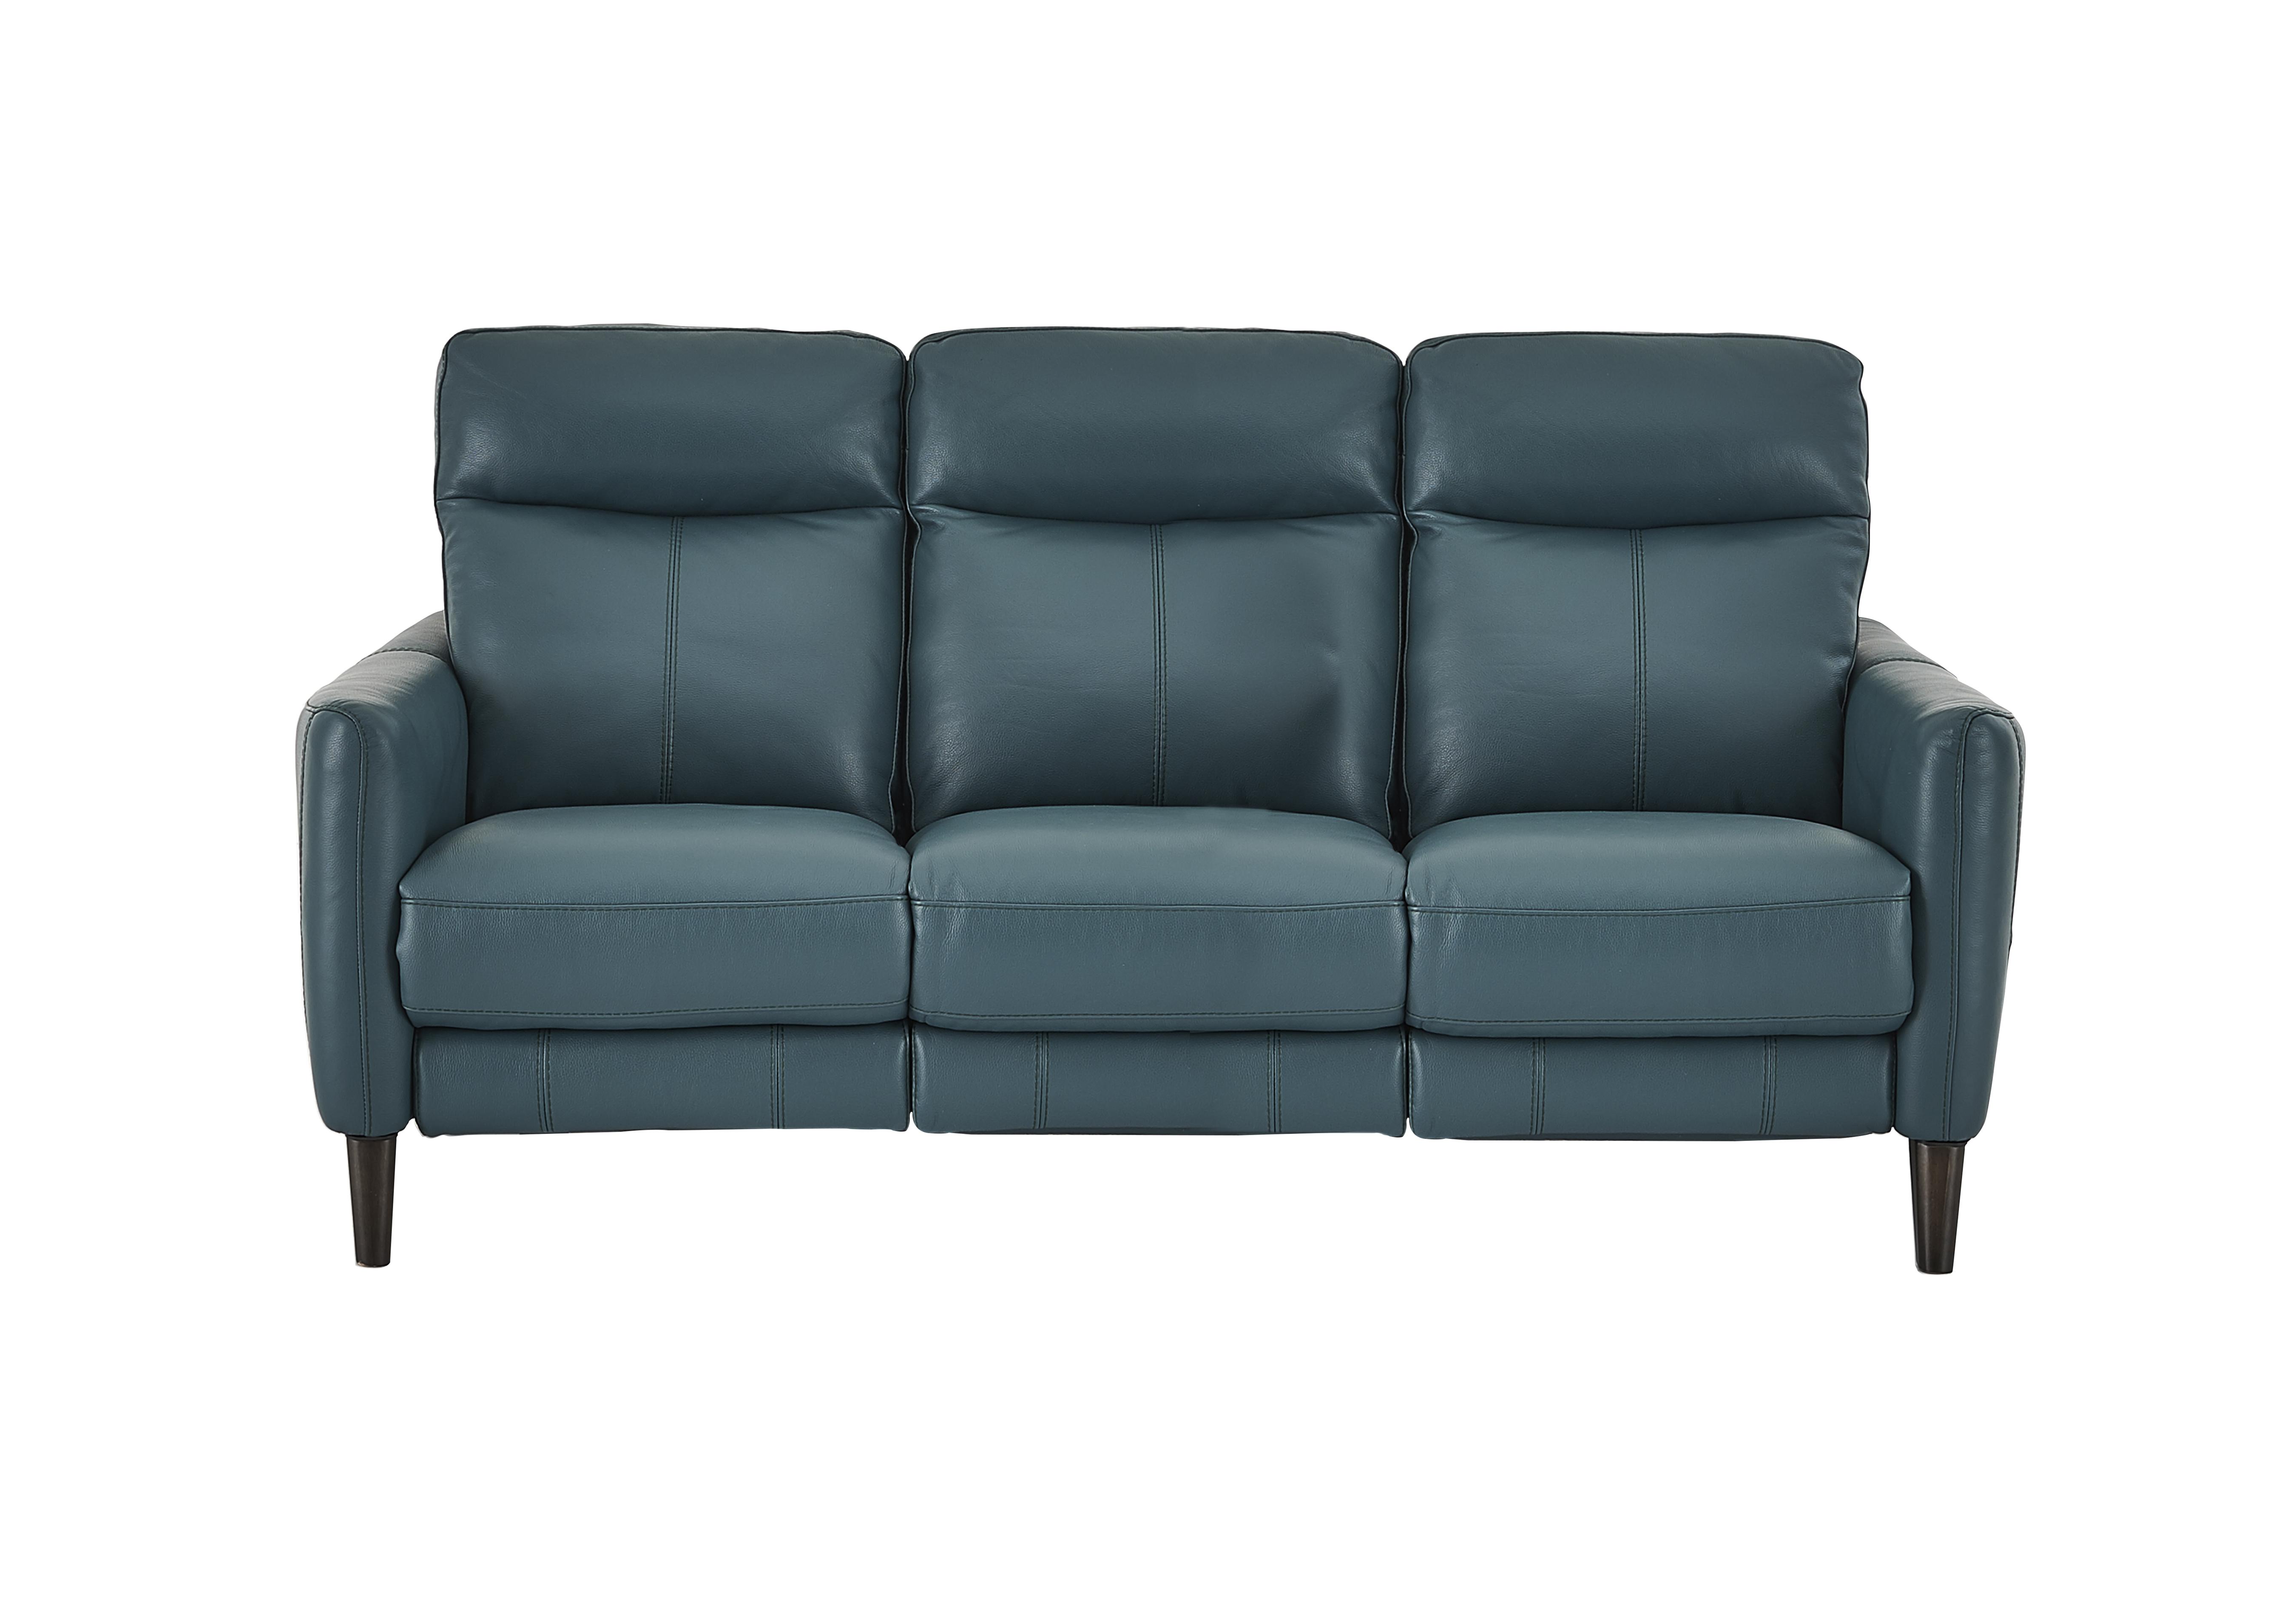 Compact Collection Petit 3 Seater Leather Sofa in Nc-301e Lake Green on Furniture Village